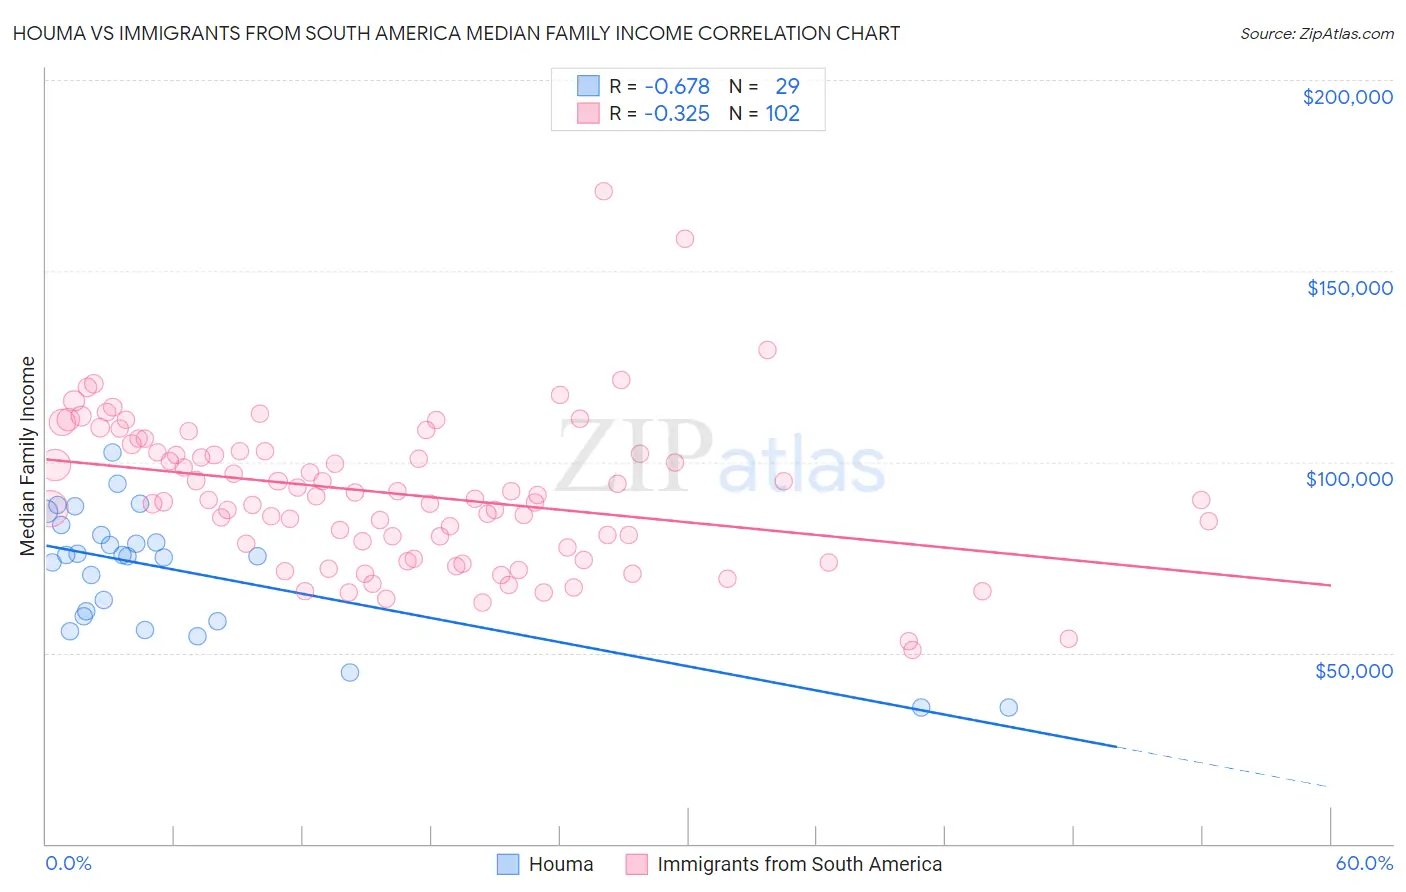 Houma vs Immigrants from South America Median Family Income